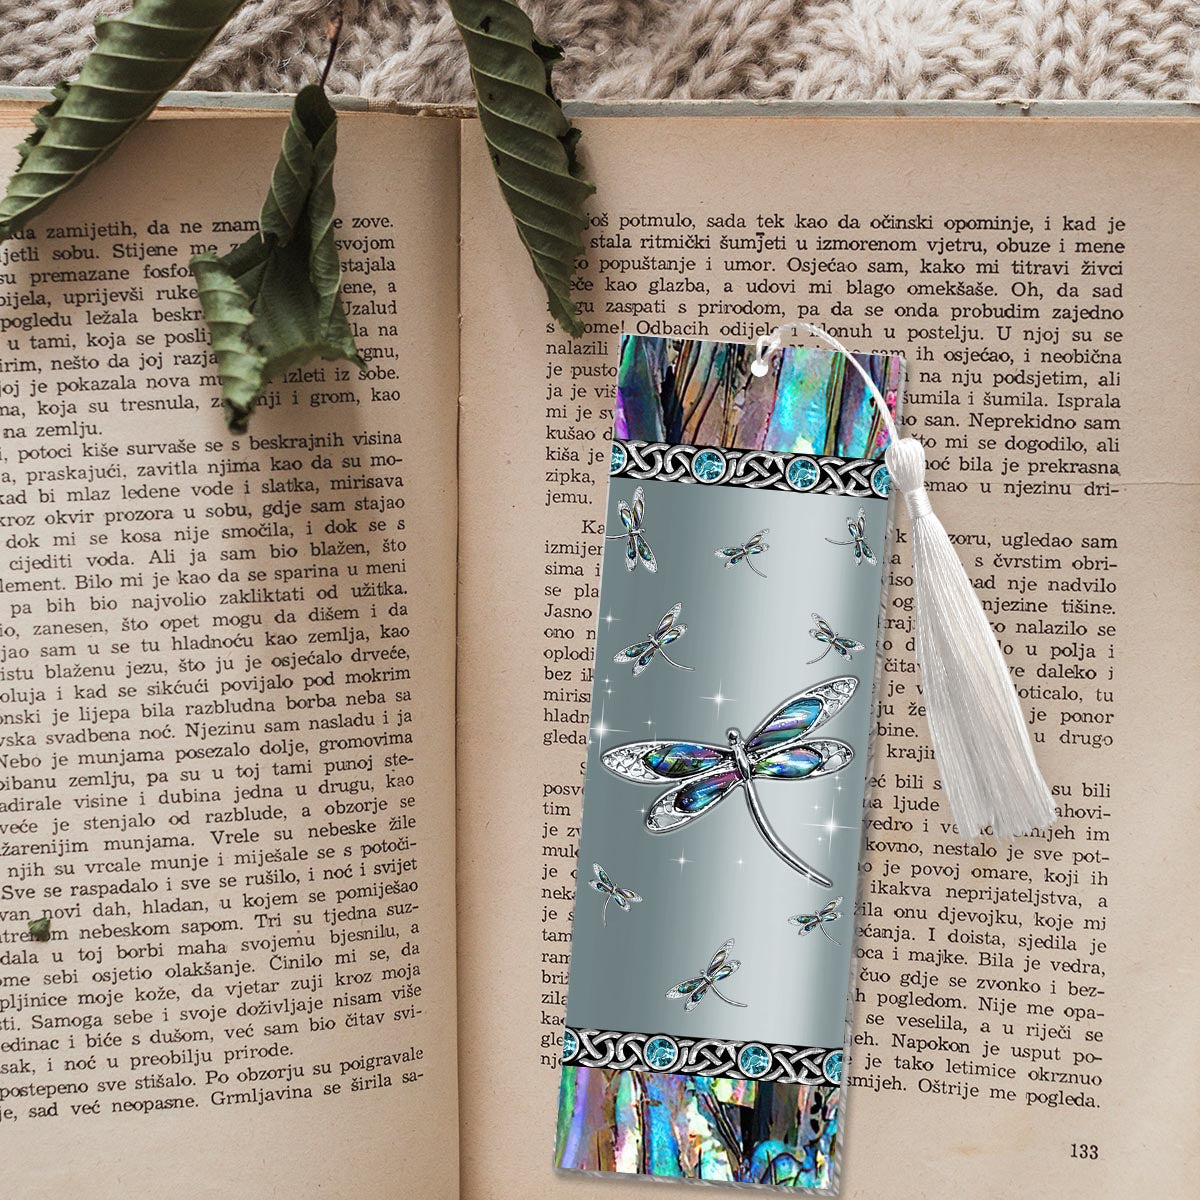 Mystery Dragonfly - Dragonfly Bookmark (Printed On Both Sides)